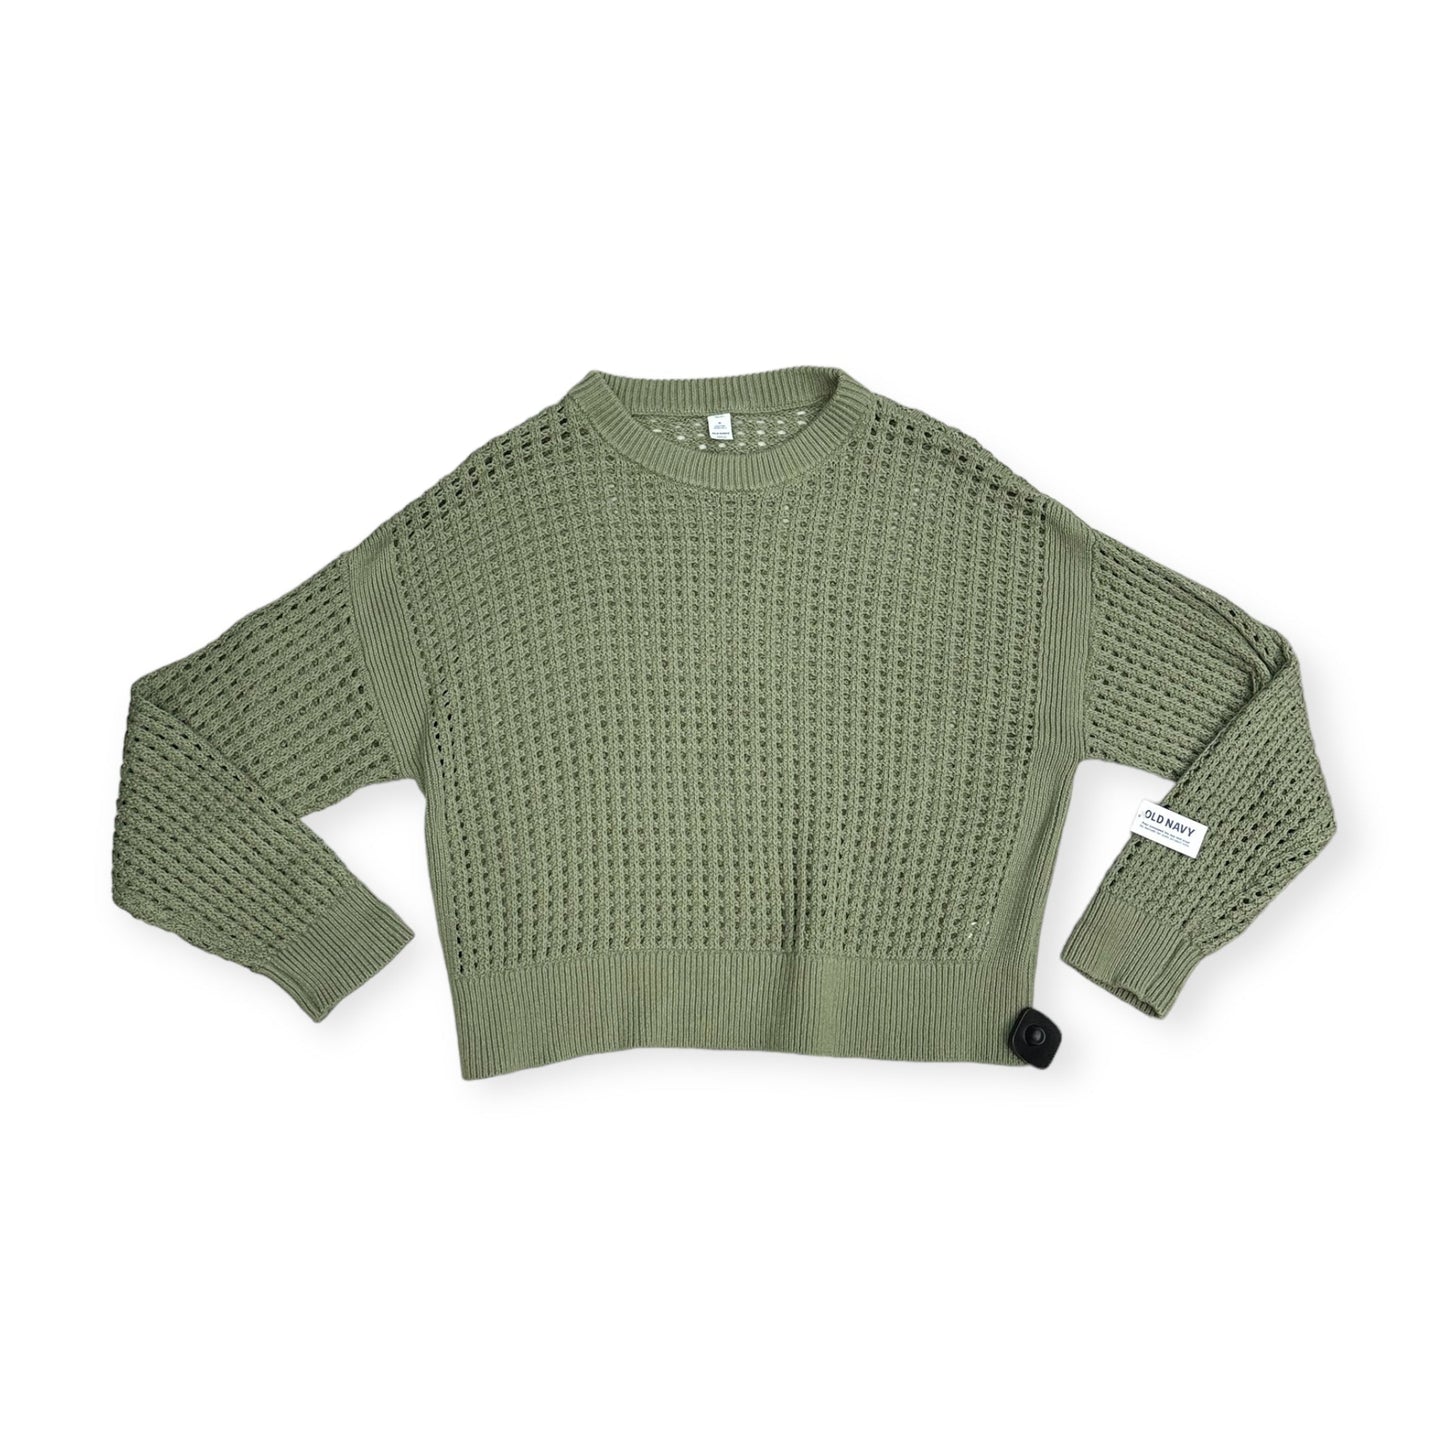 Green Sweater Old Navy, Size M